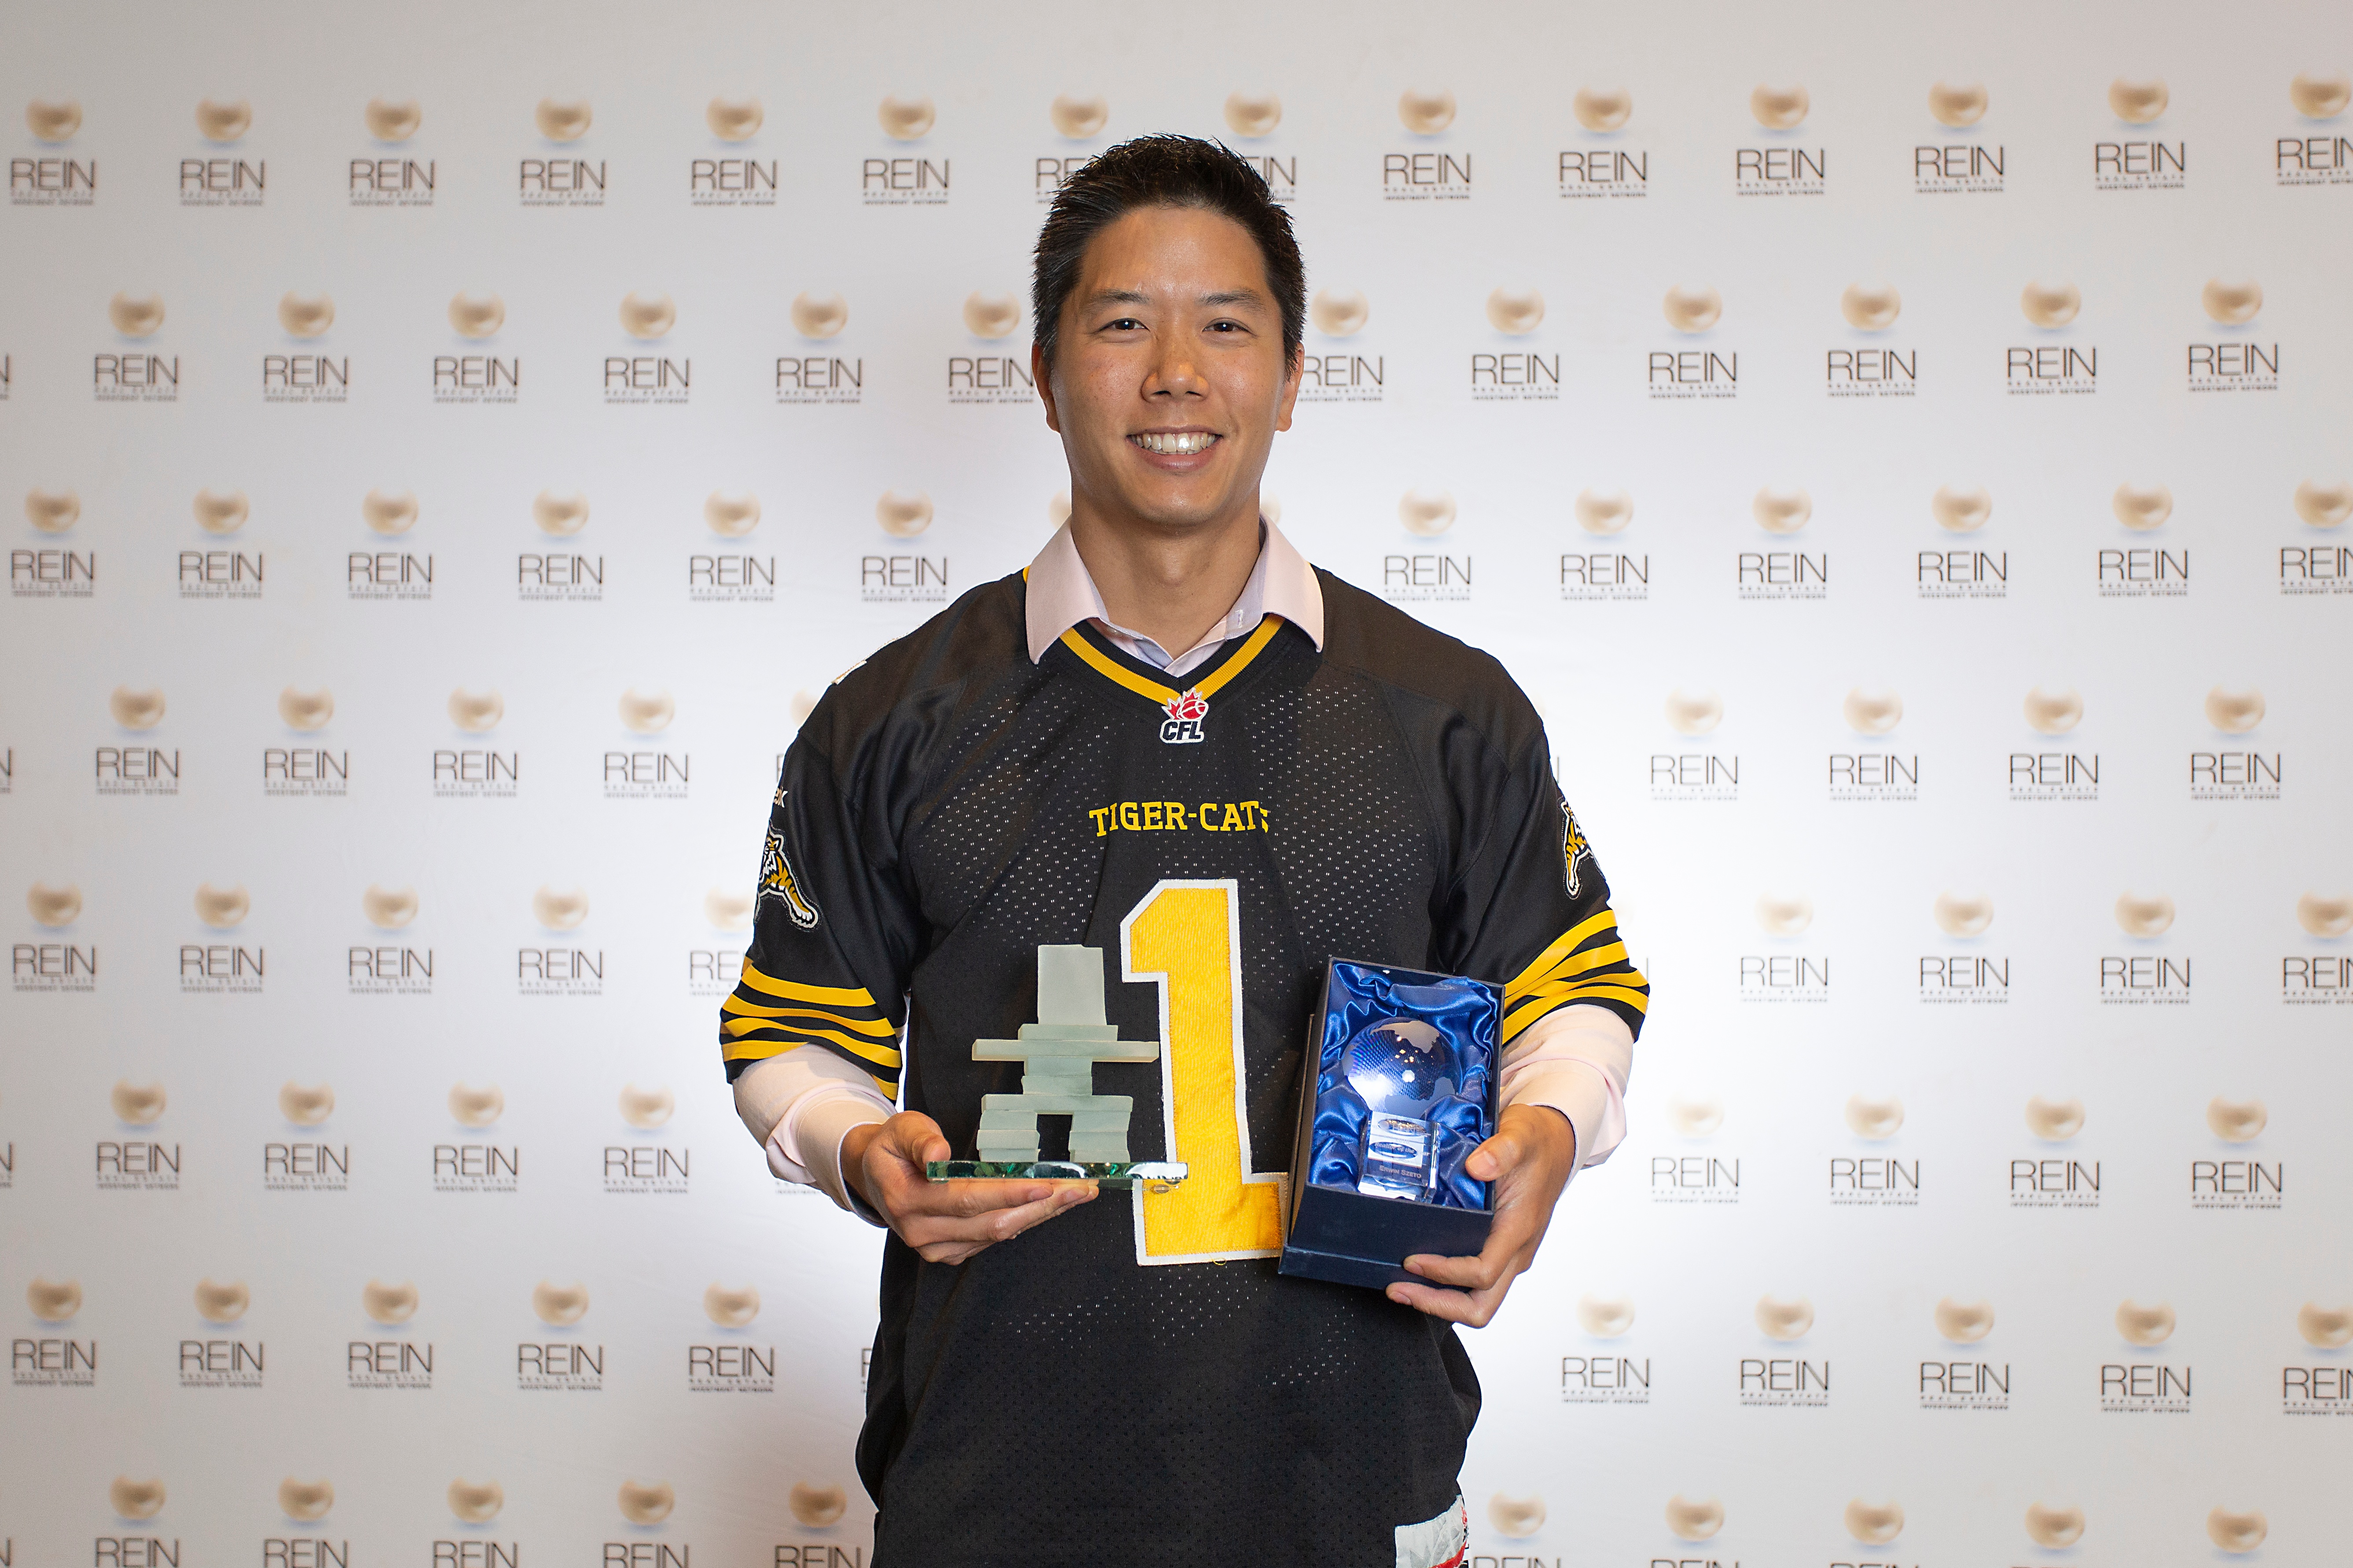 Erwin Szeto - TOR 10 Years as a Member of the Real Estate Investment Network & 2018 Realtor of the Year